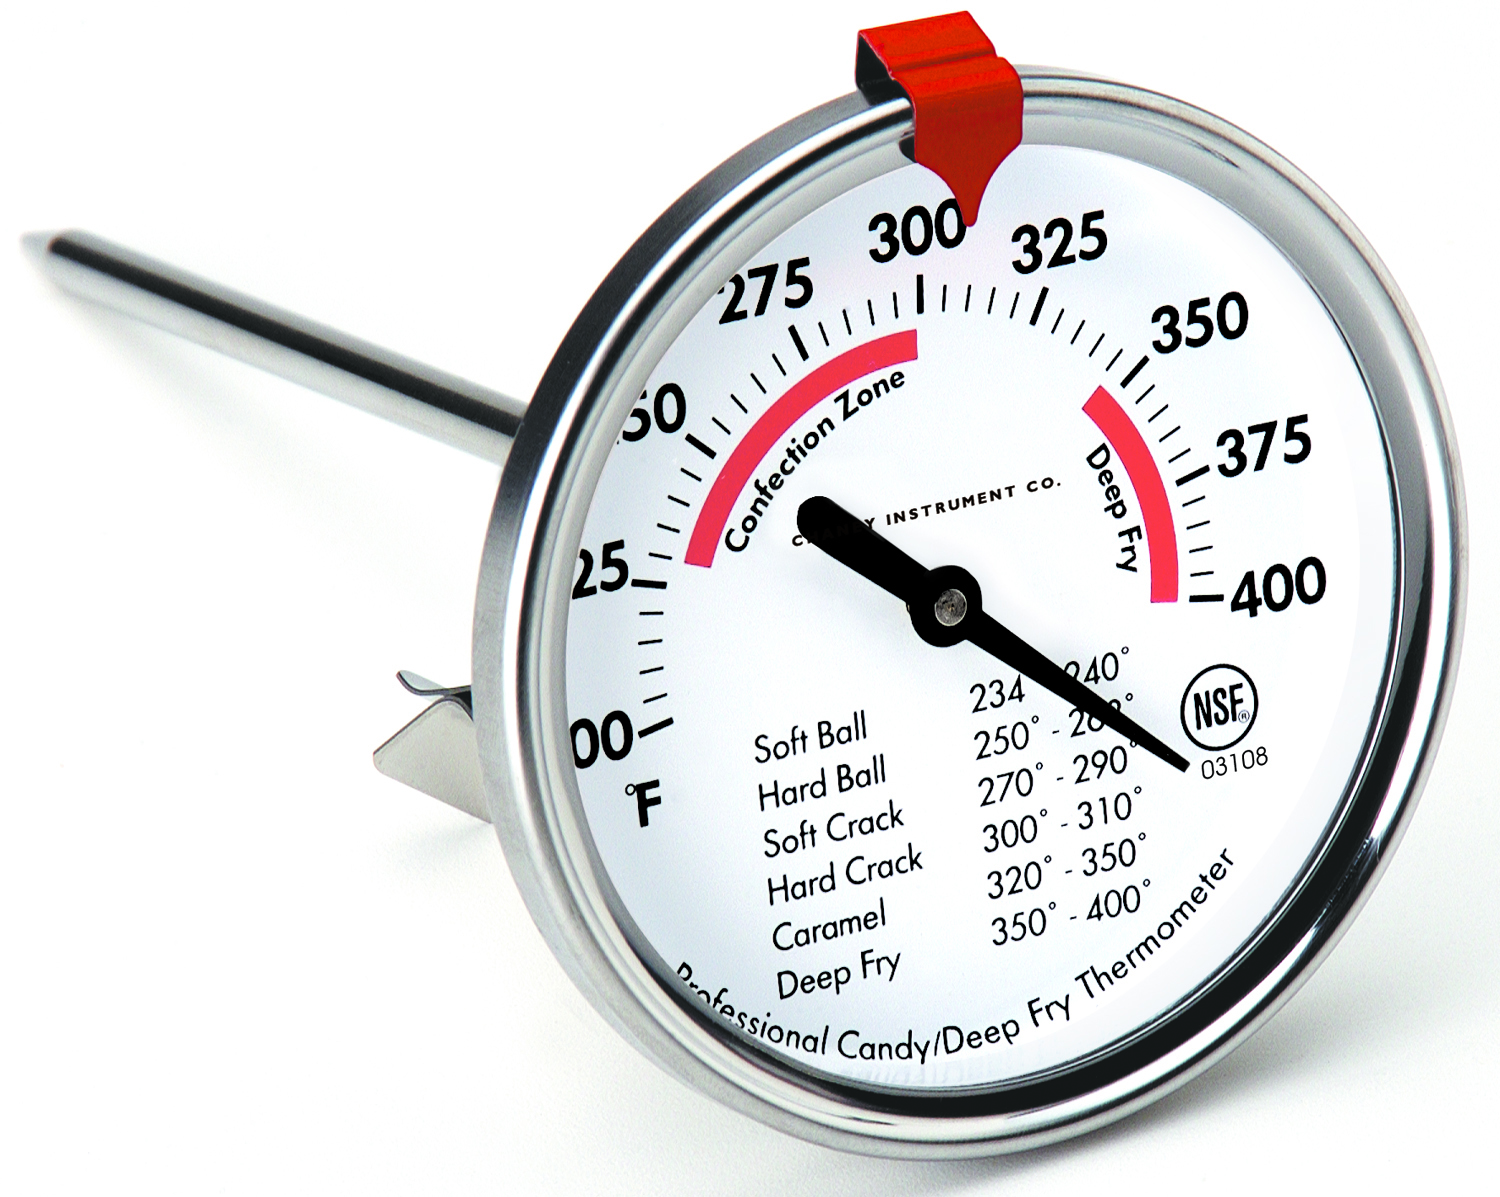 Choosing a cooking thermometer